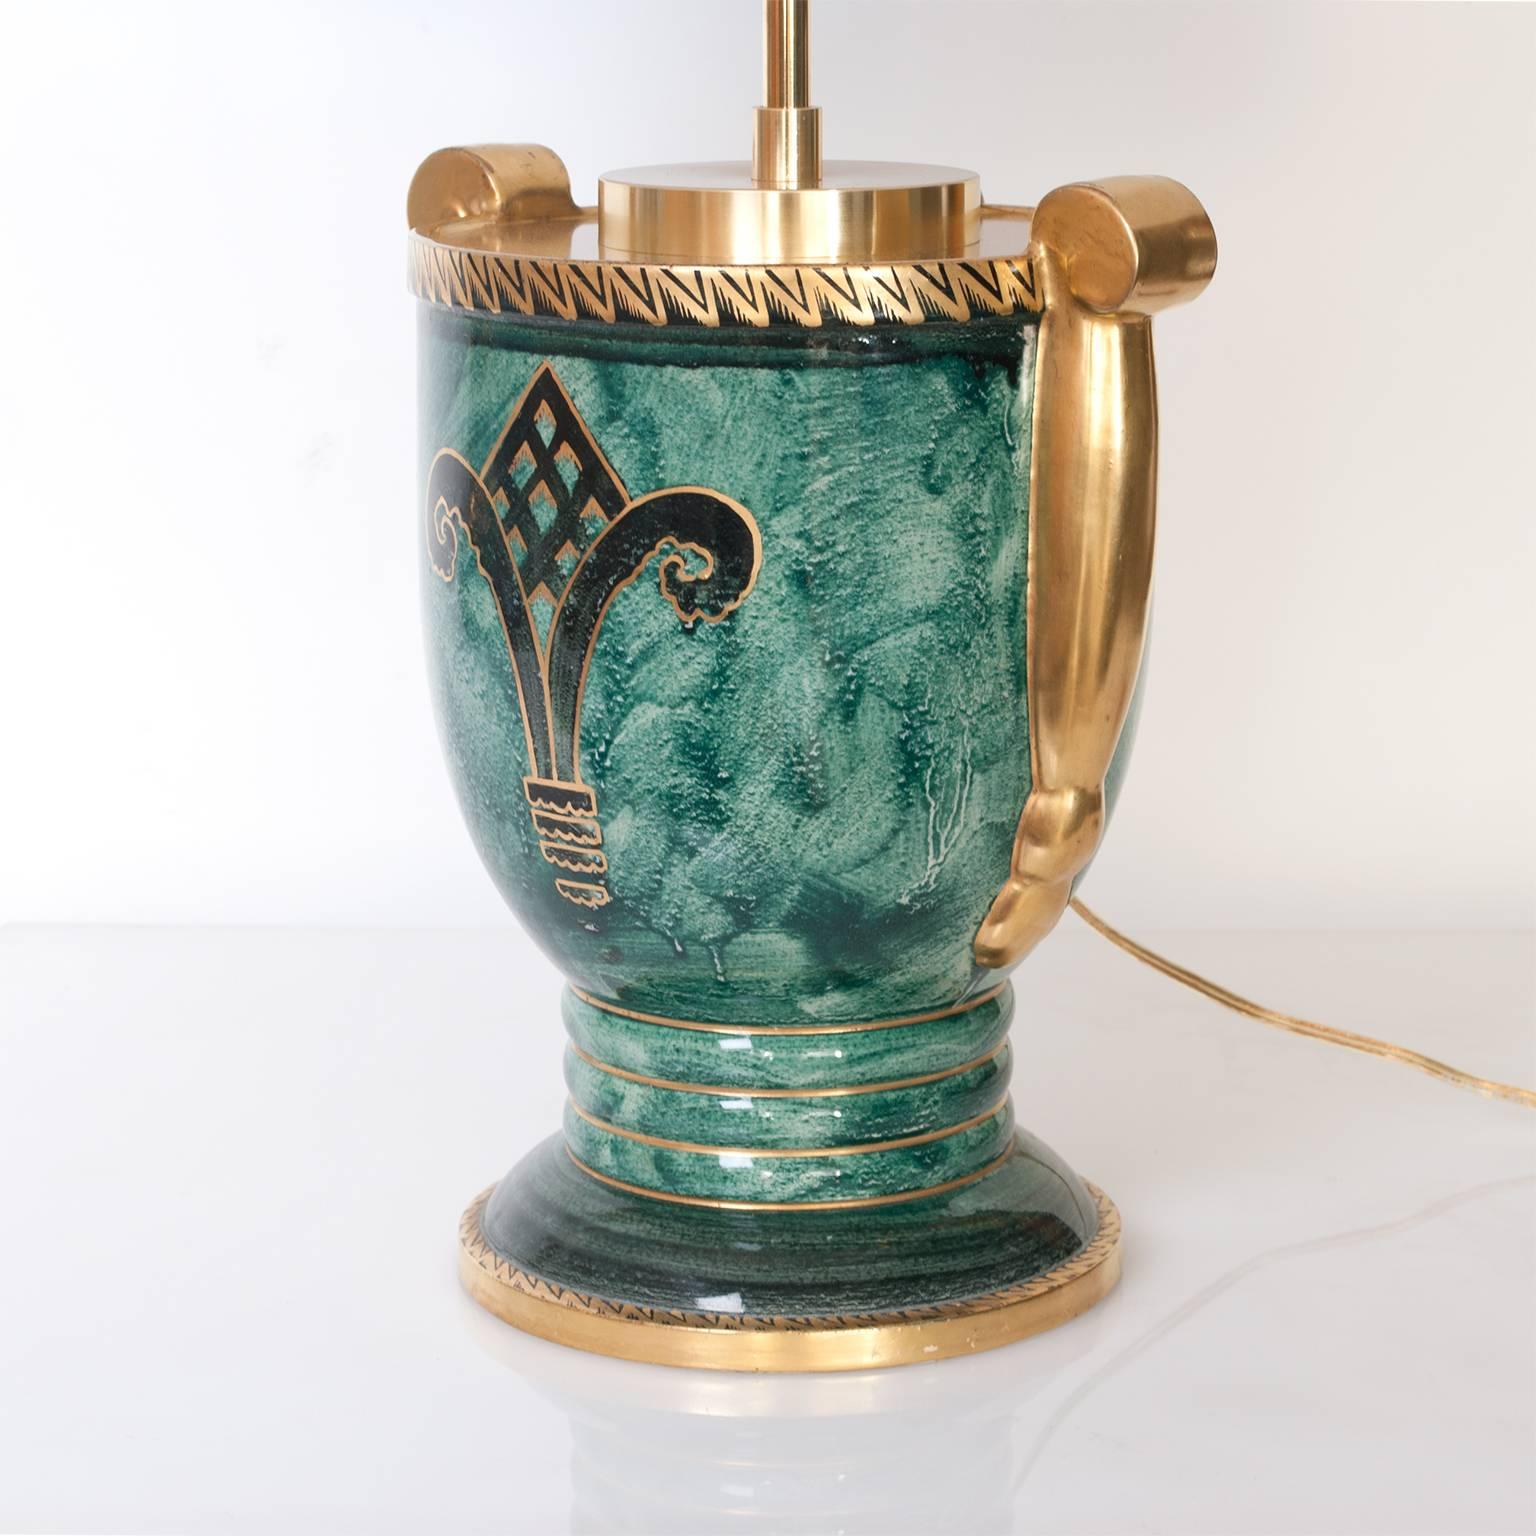 20th Century Scandinavian Modern Lamp in Luster Glaze and Hand-Decorated in Gold